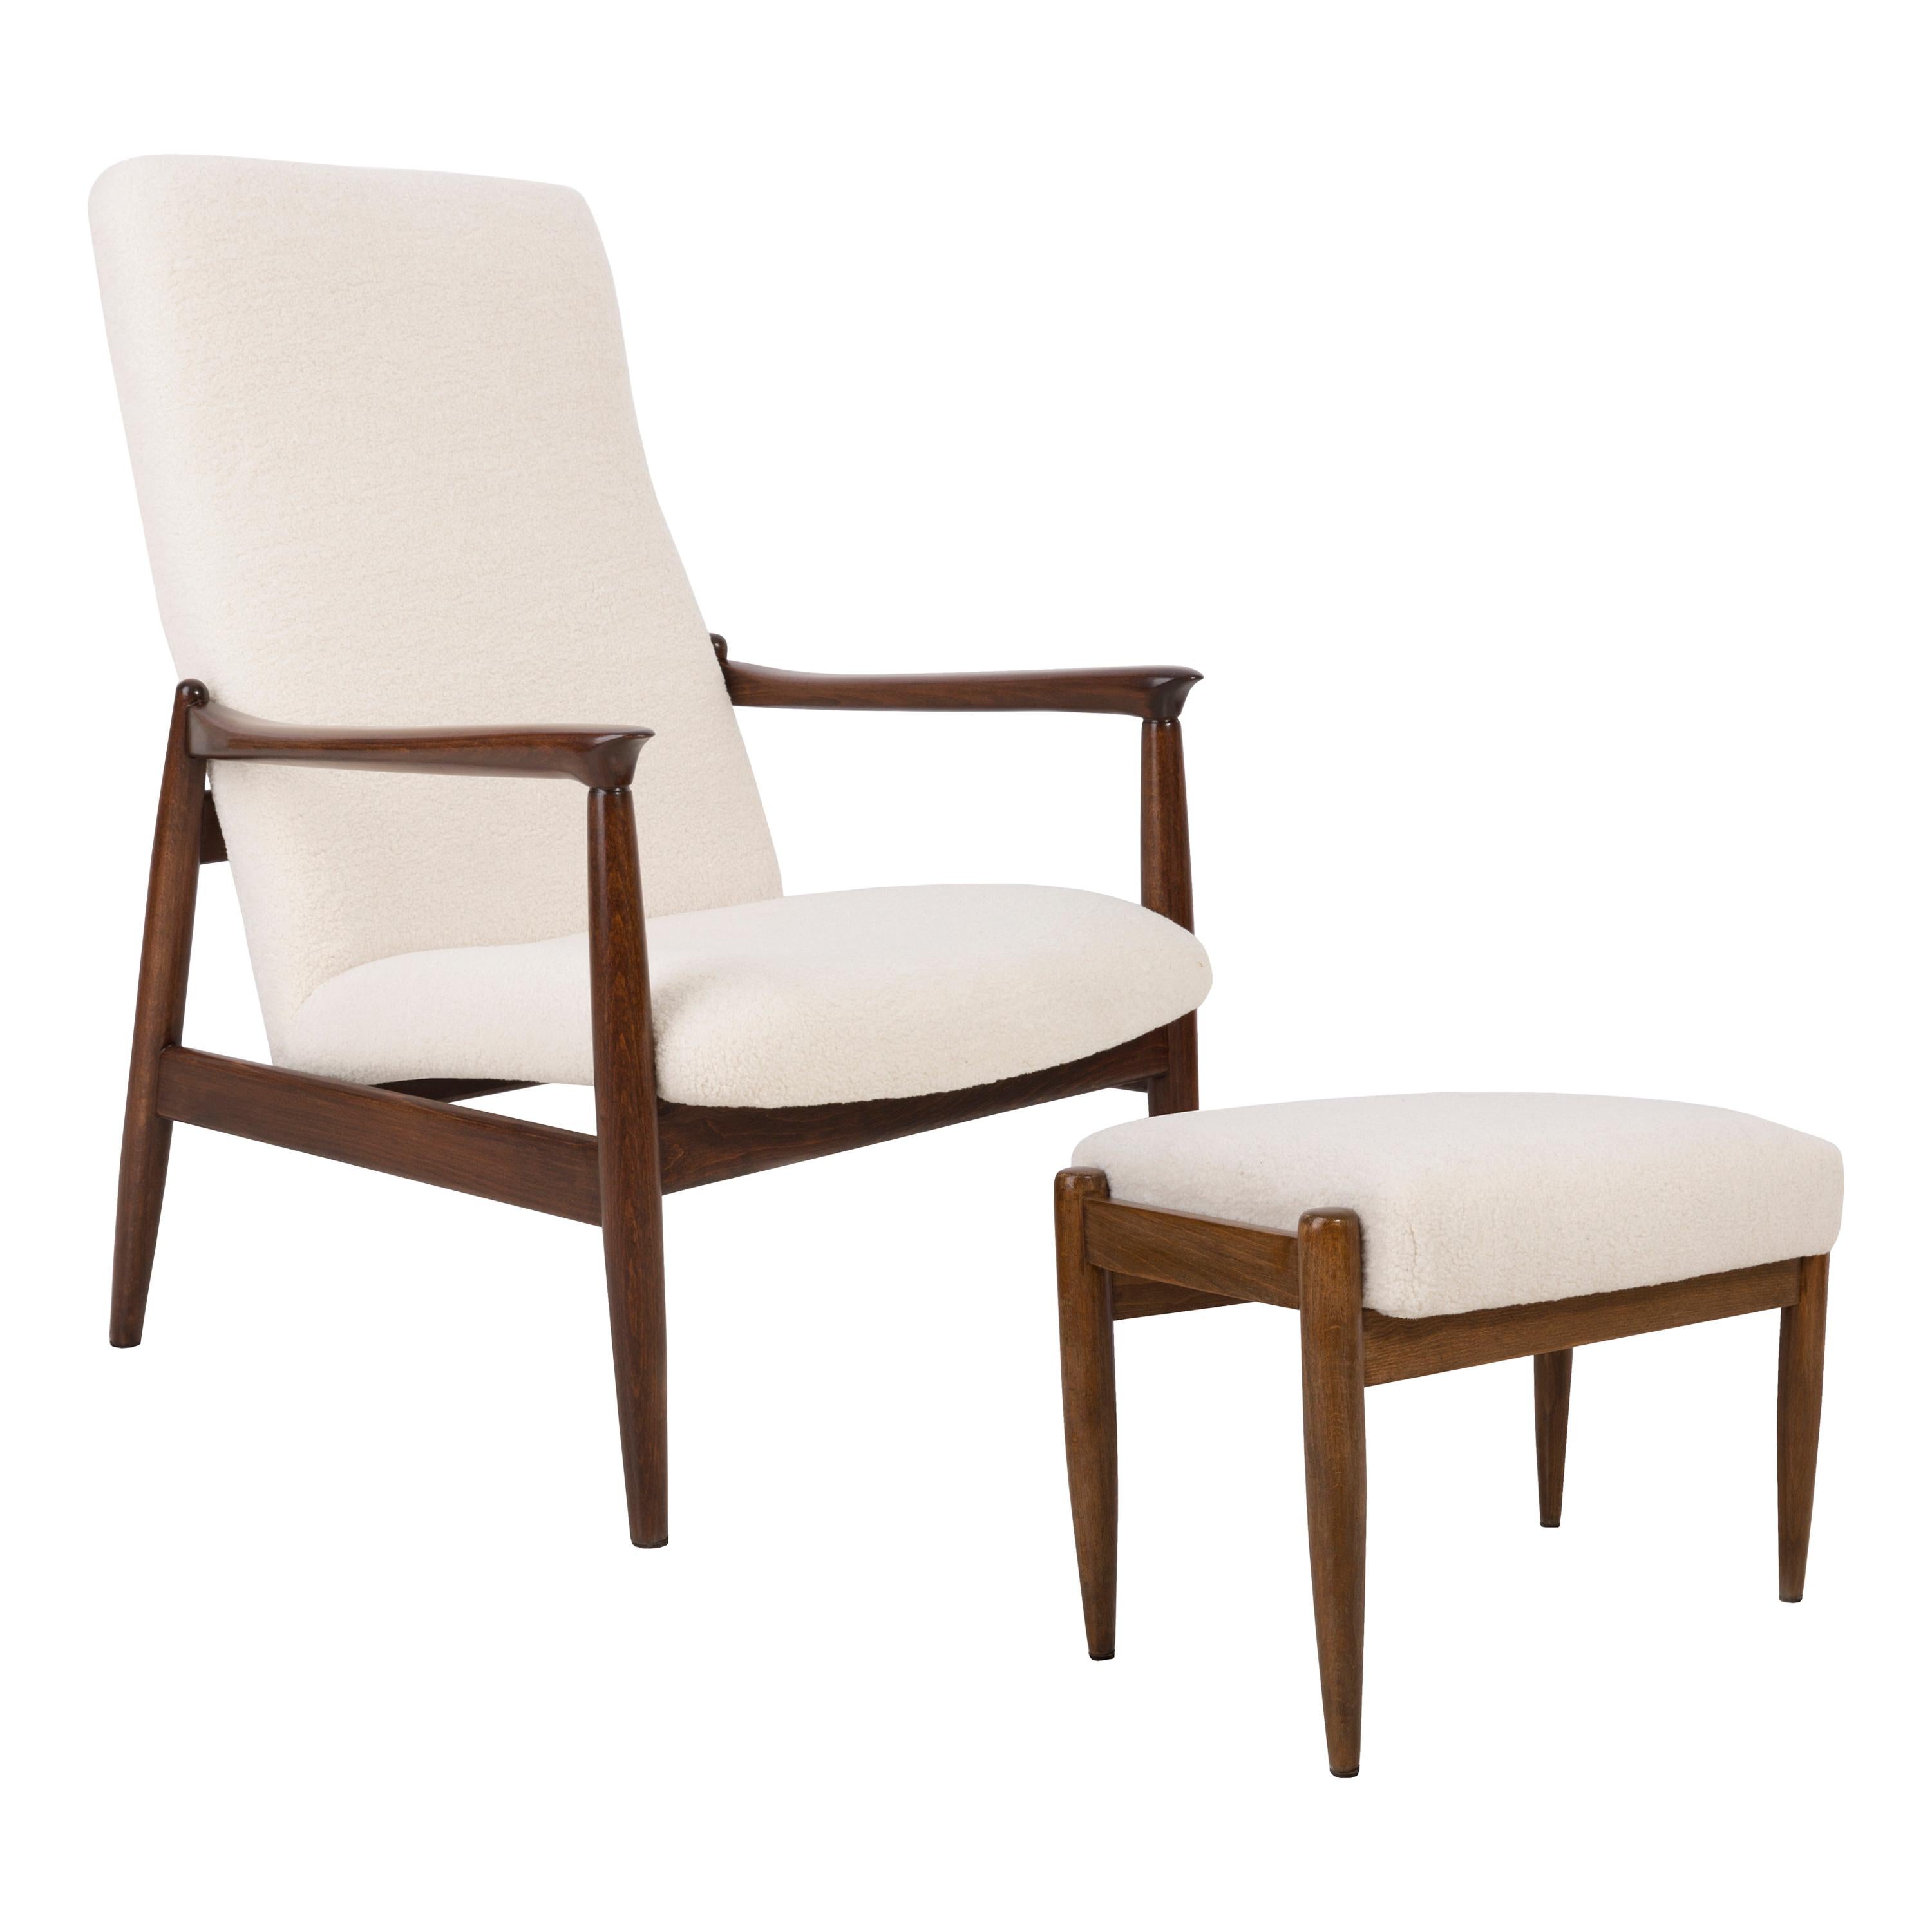 20th Century Crème Boucle Armchair and Stool, Edmund Homa, 1960s For Sale